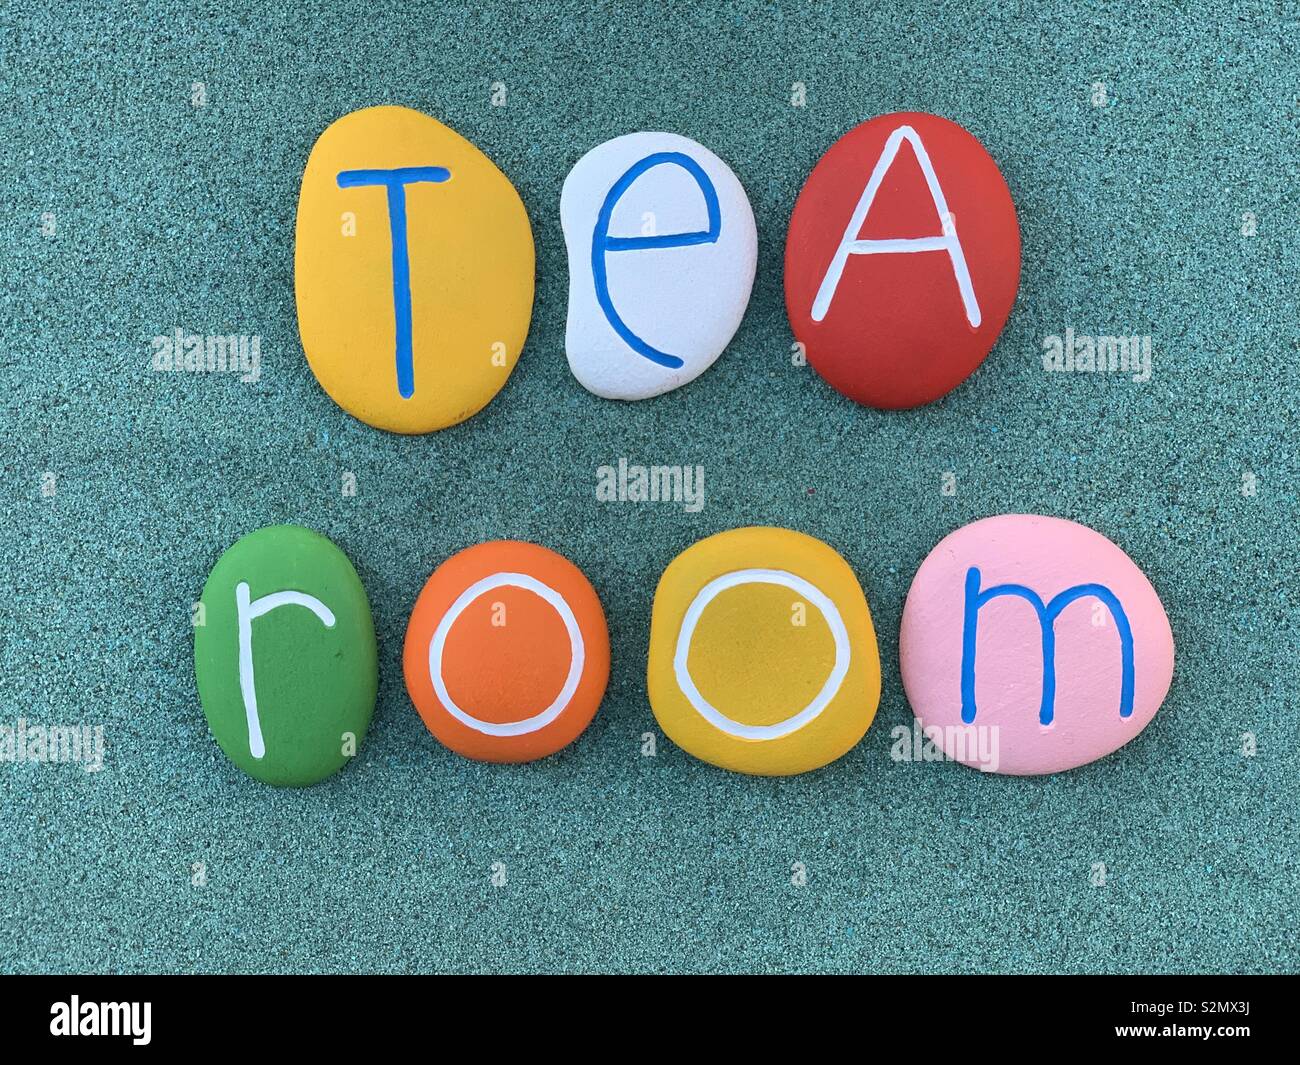 Tea room sign composed with multi colored stones over green sand Stock Photo